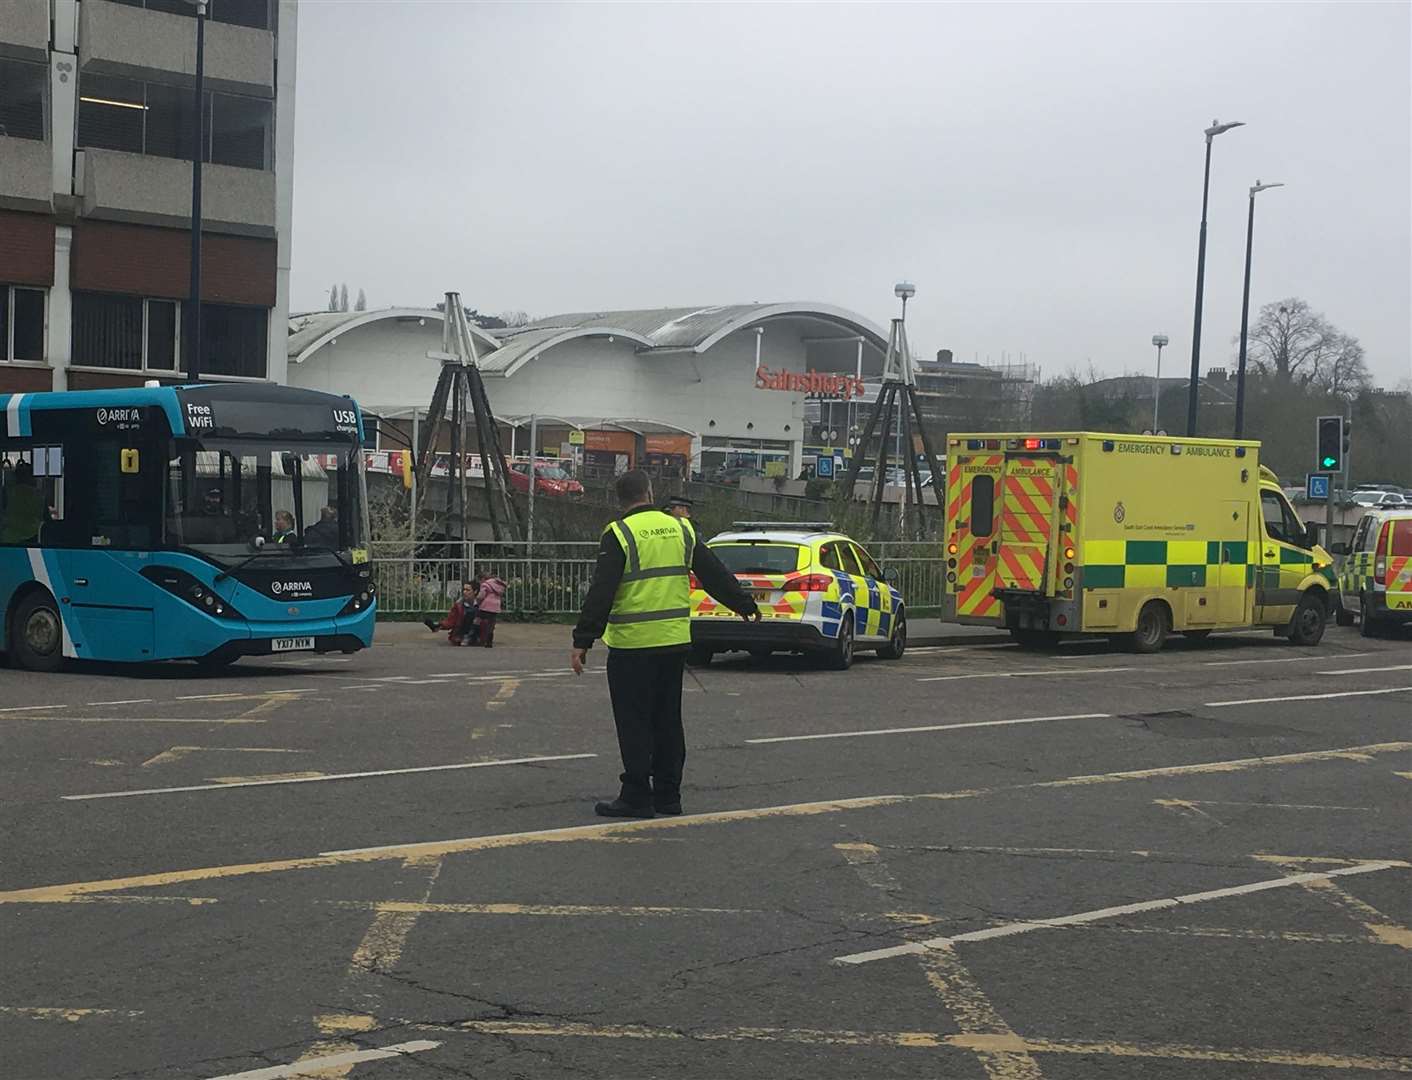 Passengers have been treated after a bus crashed this afternoon